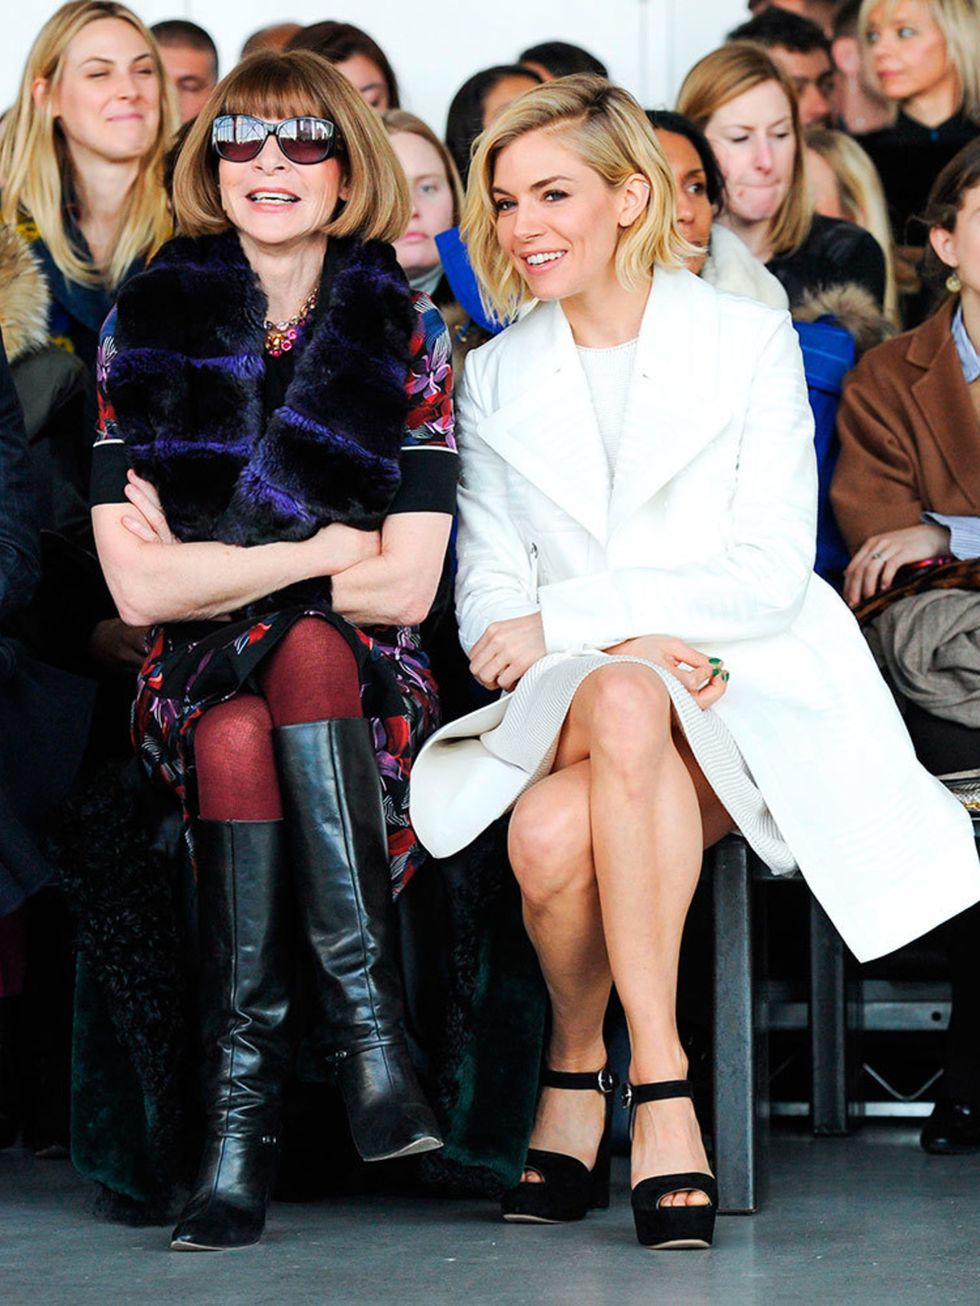 Sienna Miller and Anna Wintour attend the Calvin Klein a/w 2015 show.